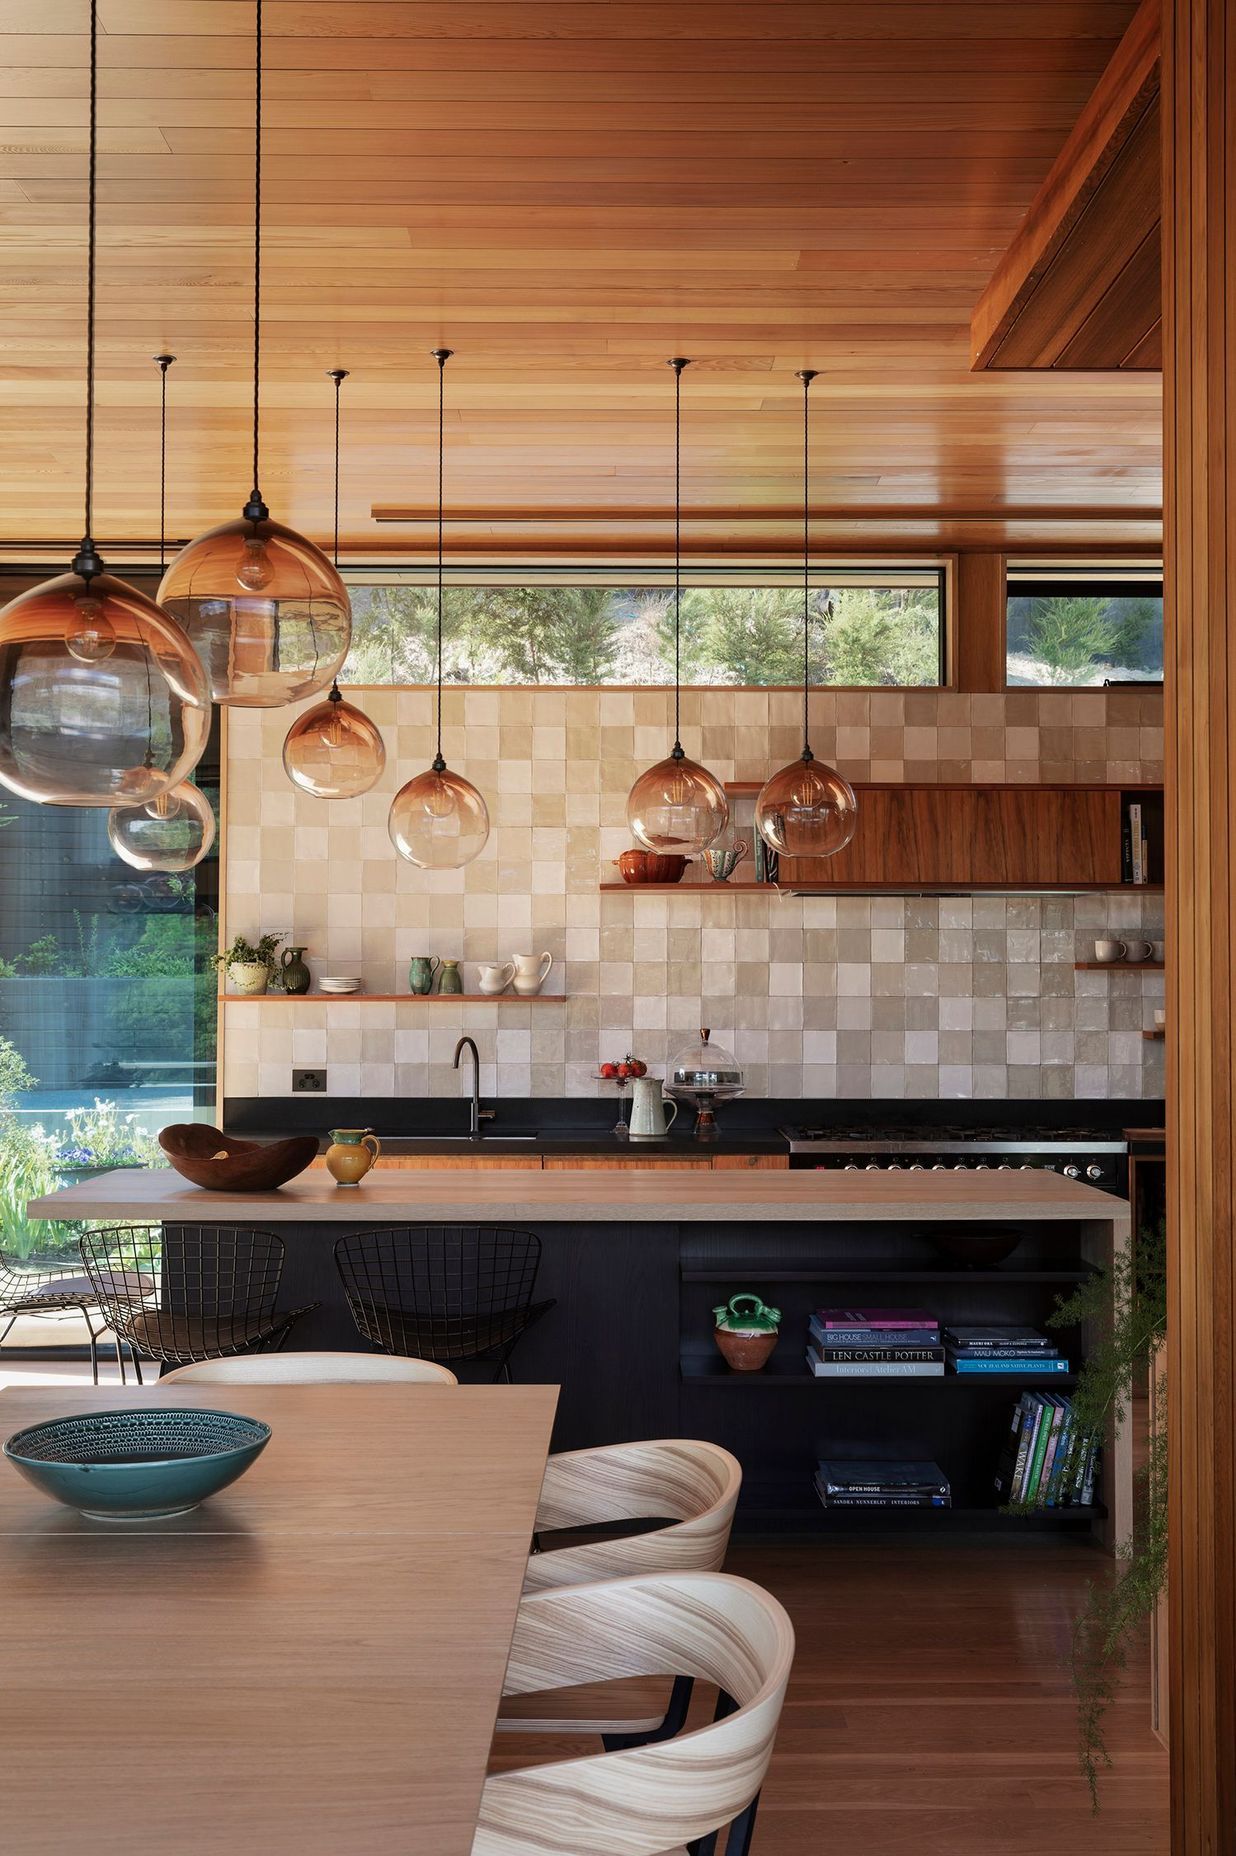 Handblown pendent lights speckle the open-plan living space and tie it together.